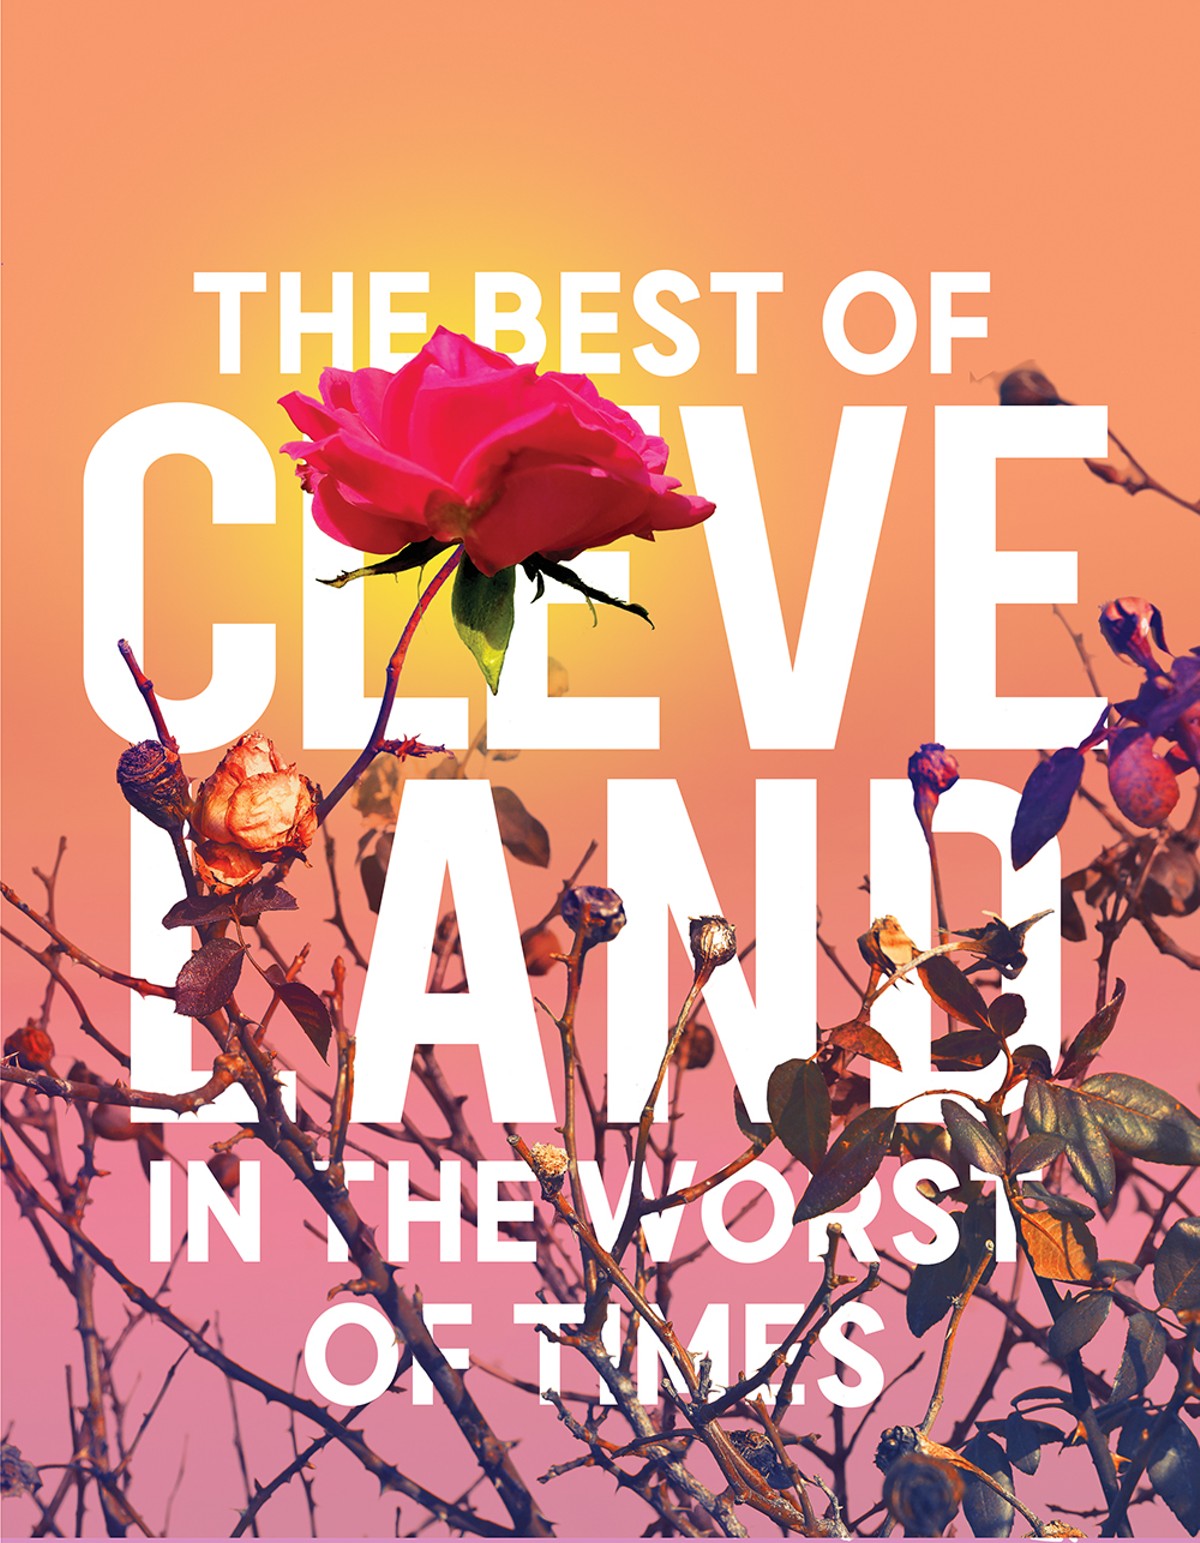 Best of Cleveland: Sports & Recreation